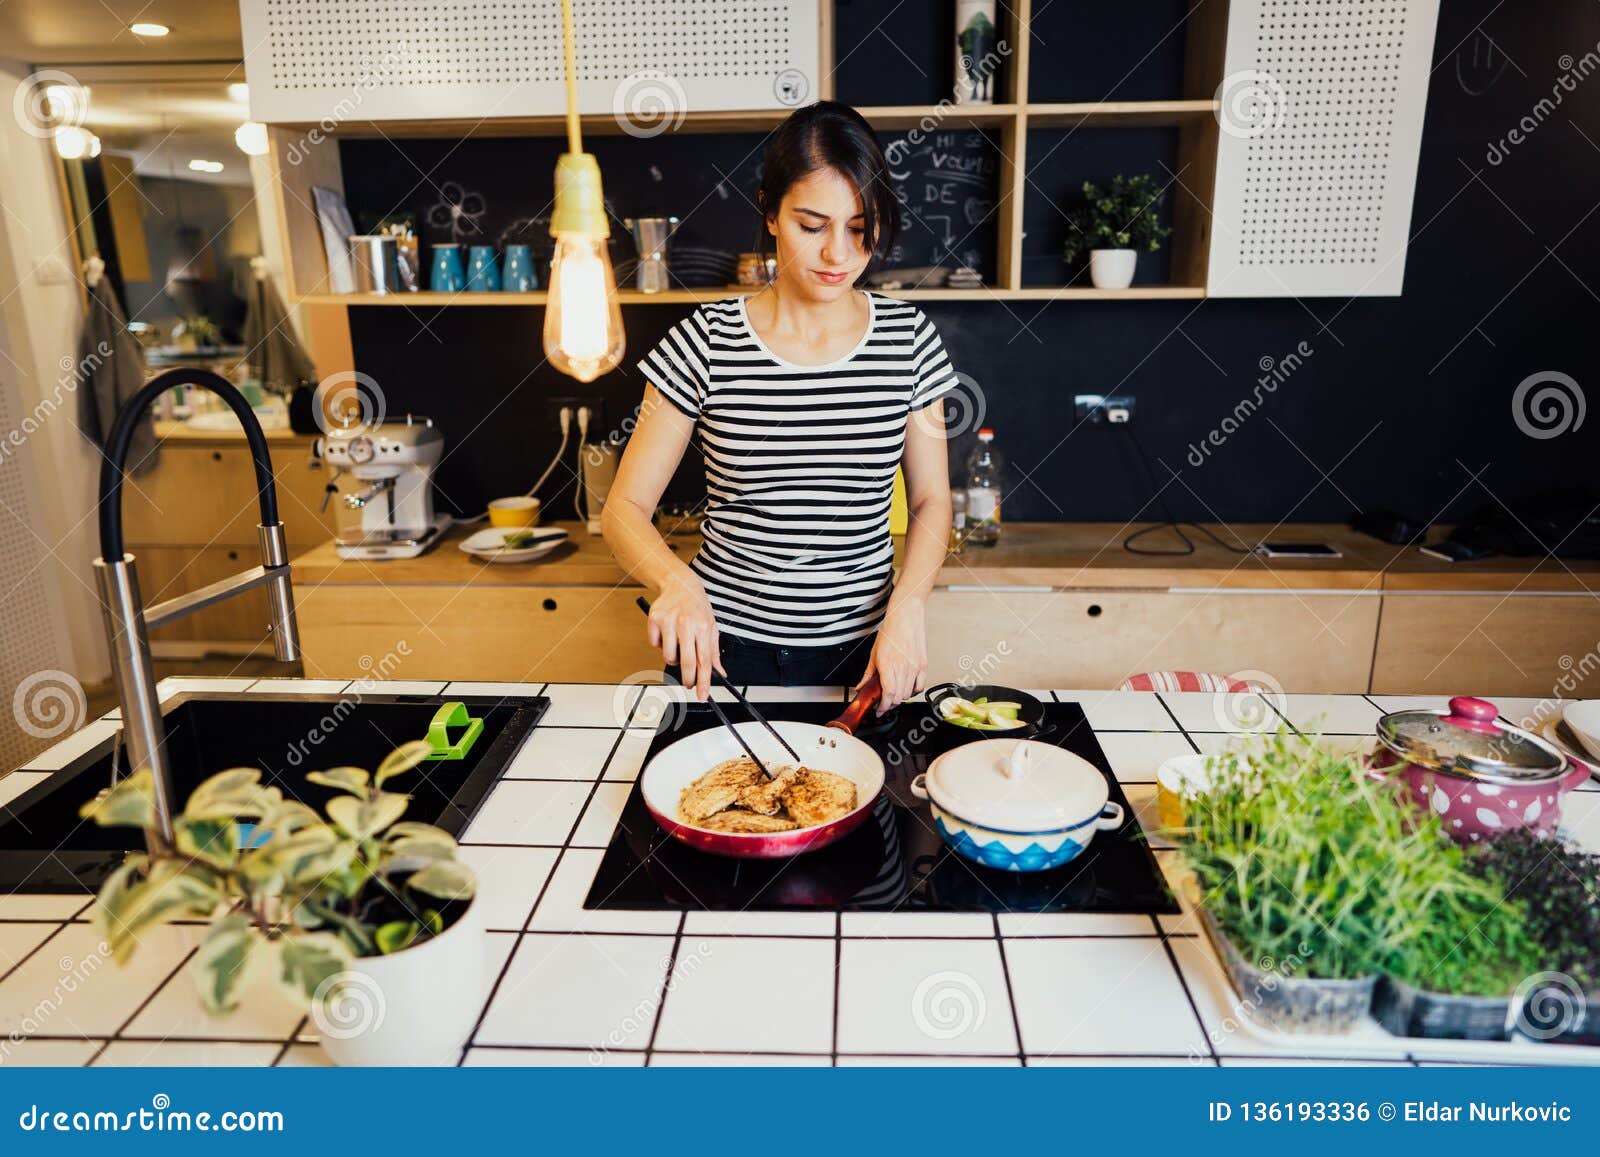 https://thumbs.dreamstime.com/z/smiling-woman-cooking-healthy-meal-home-kitchen-making-dinner-island-standing-induction-hob-preparing-chicken-enjoying-136193336.jpg